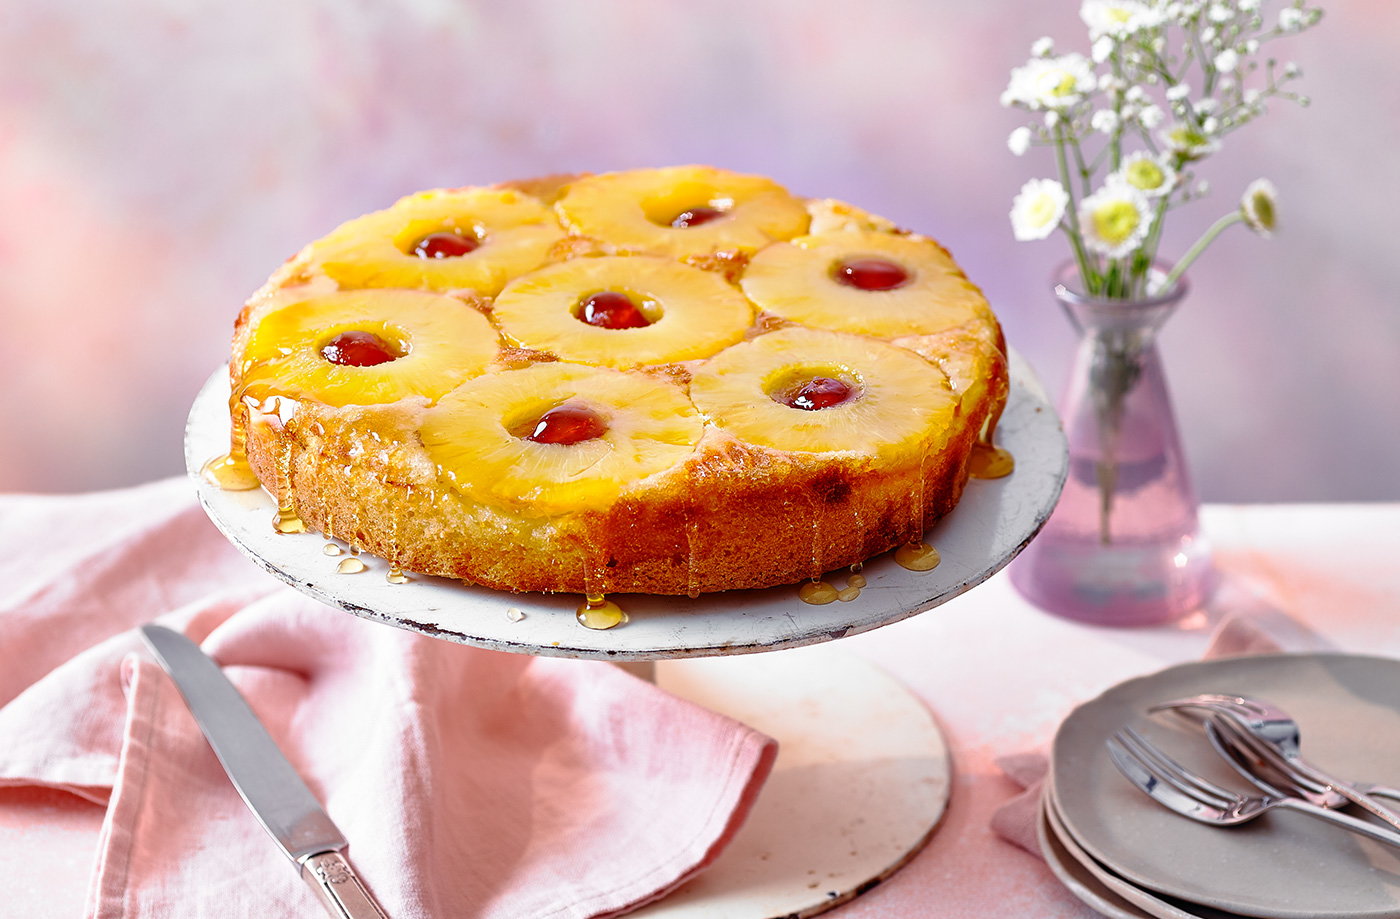 11-facts-about-national-pineapple-upside-down-cake-day-april-20th